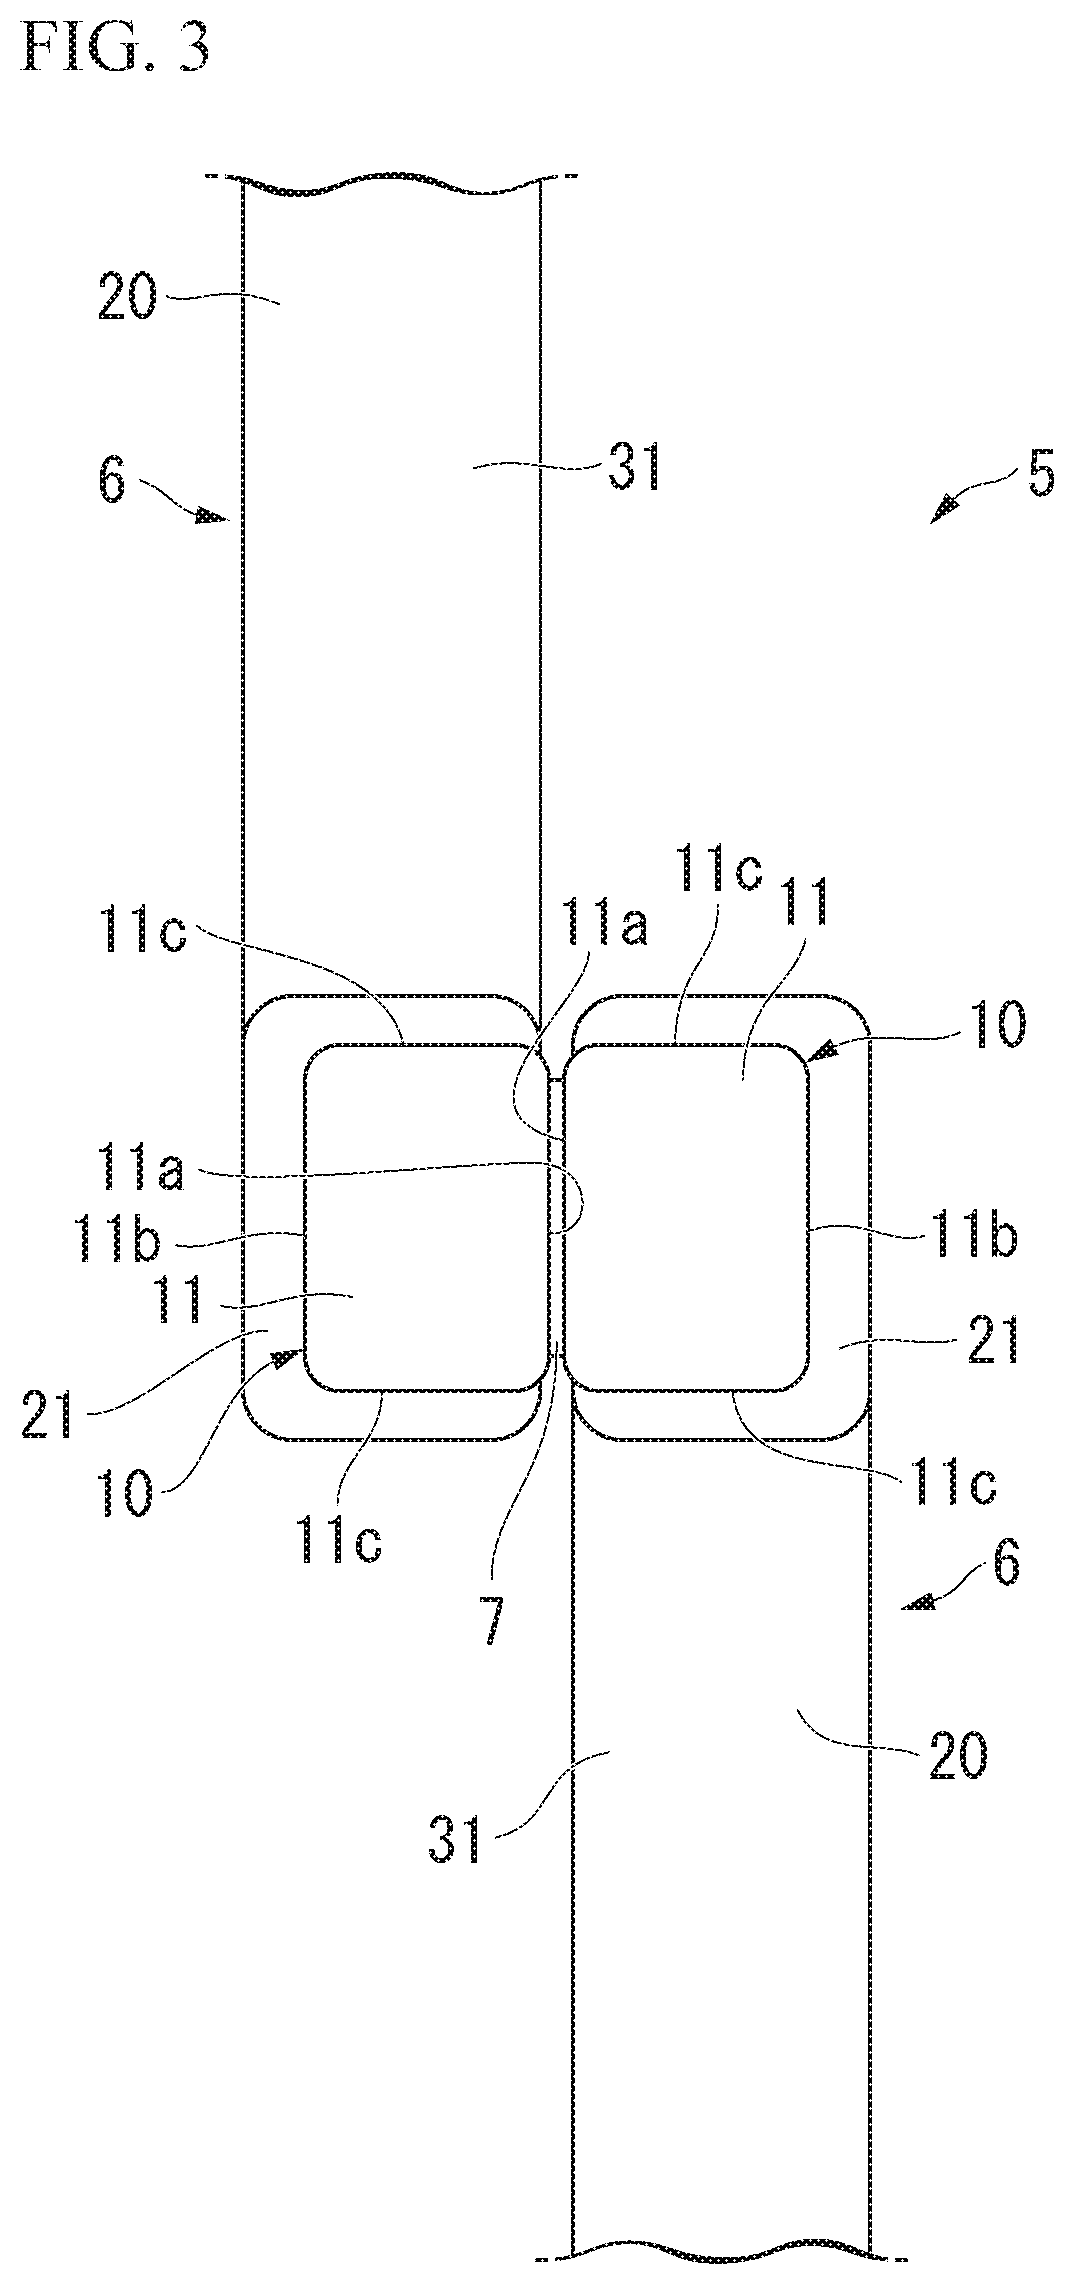 Electric wire segment and stator